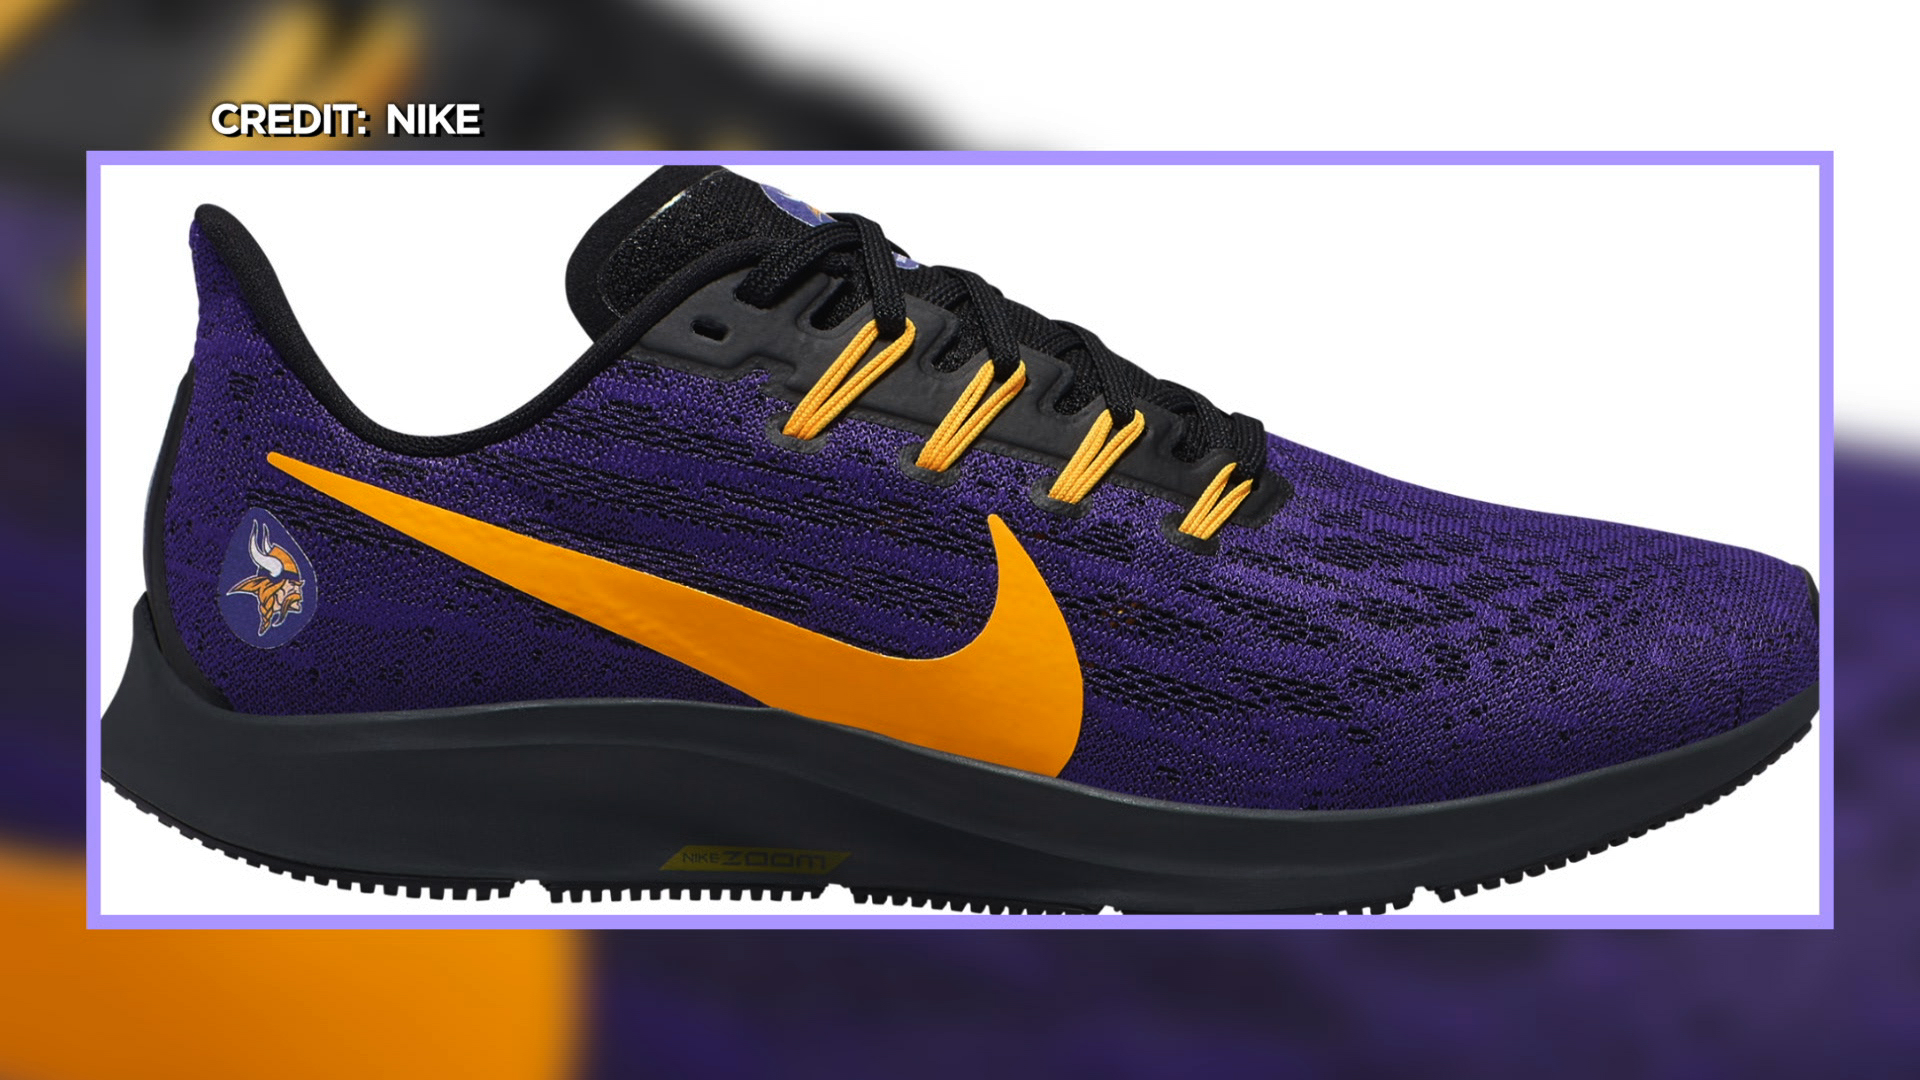 Limited Edition Vikings-Themed Nikes 